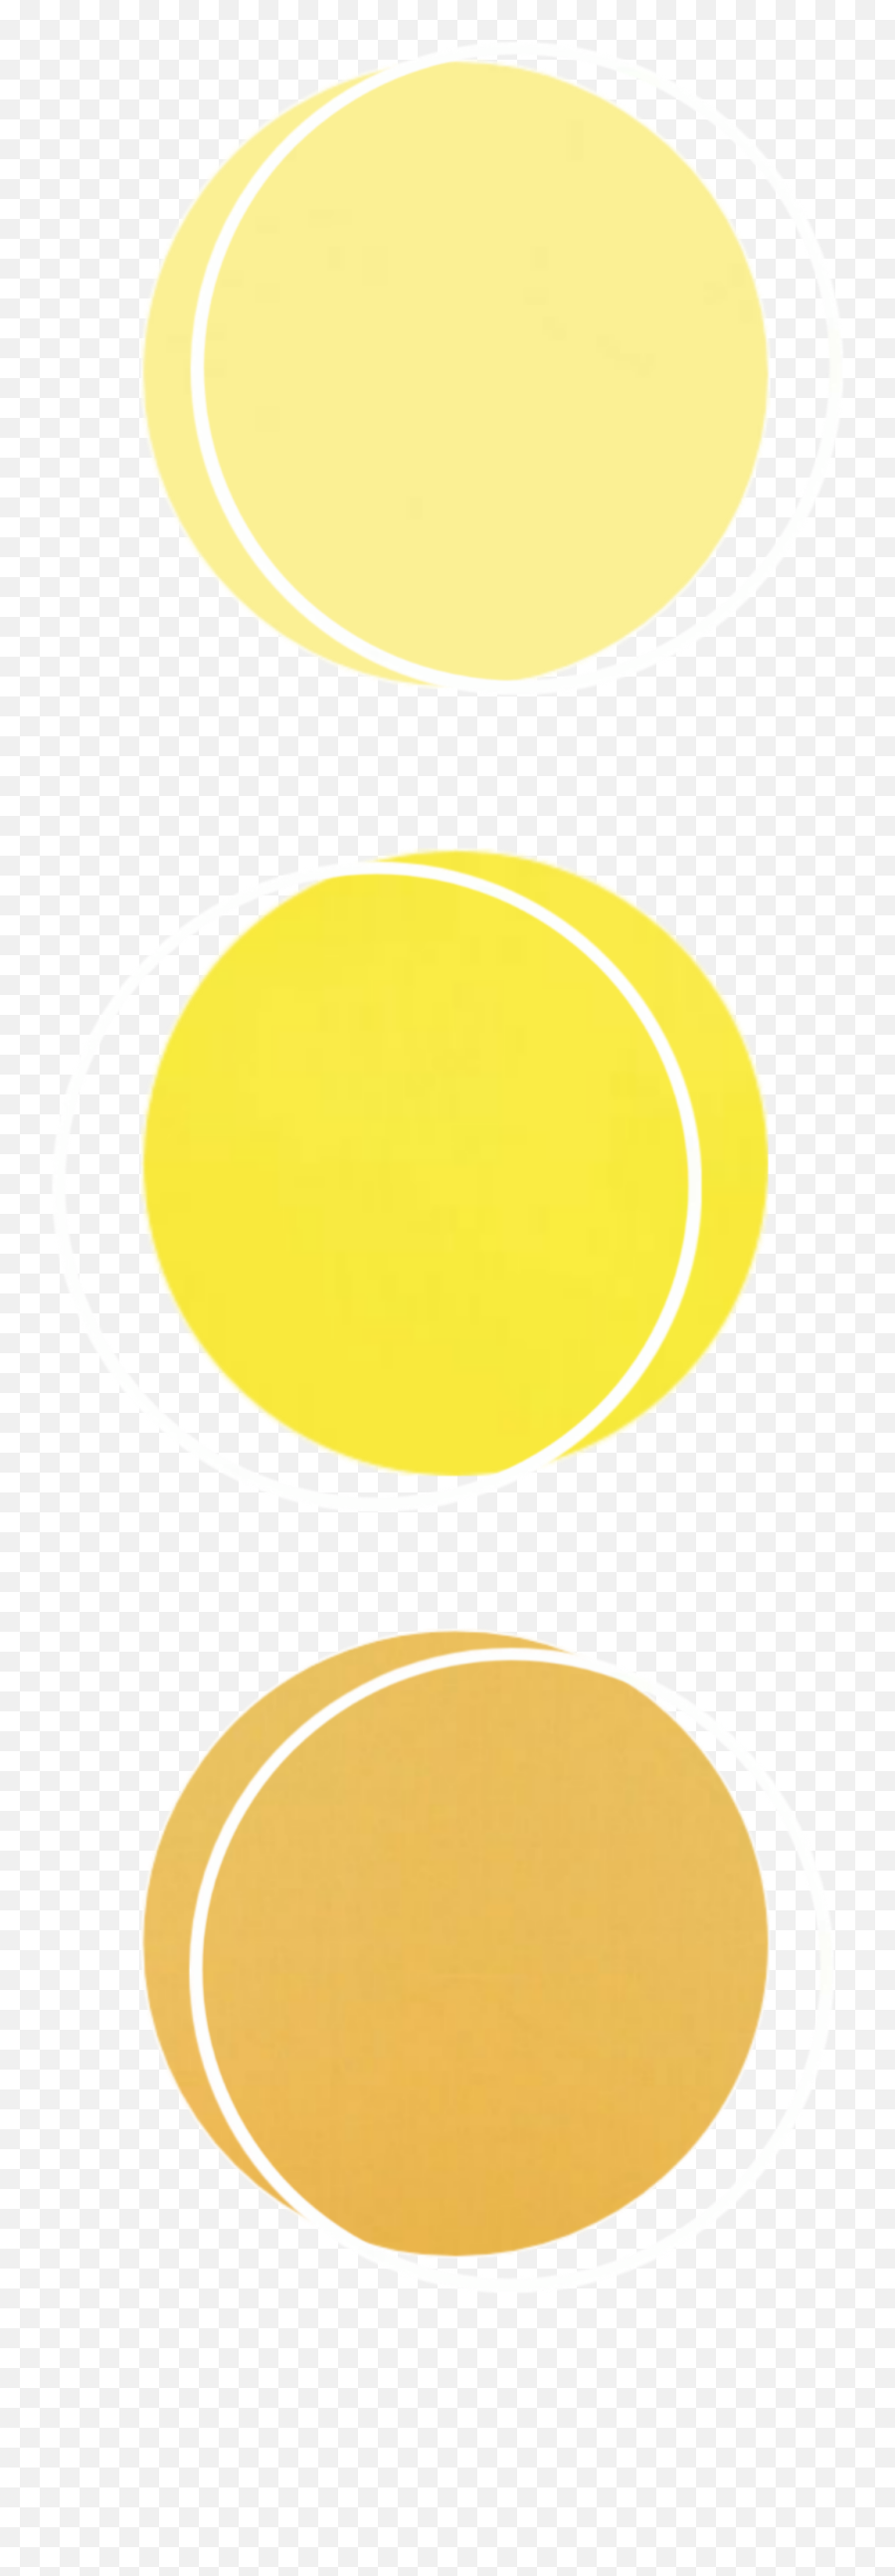 Yellow Aesthetic Transparent Background - Novocomtop Yellow Colour Palette Aesthetic Emoji,Aesthetic Stickers Png